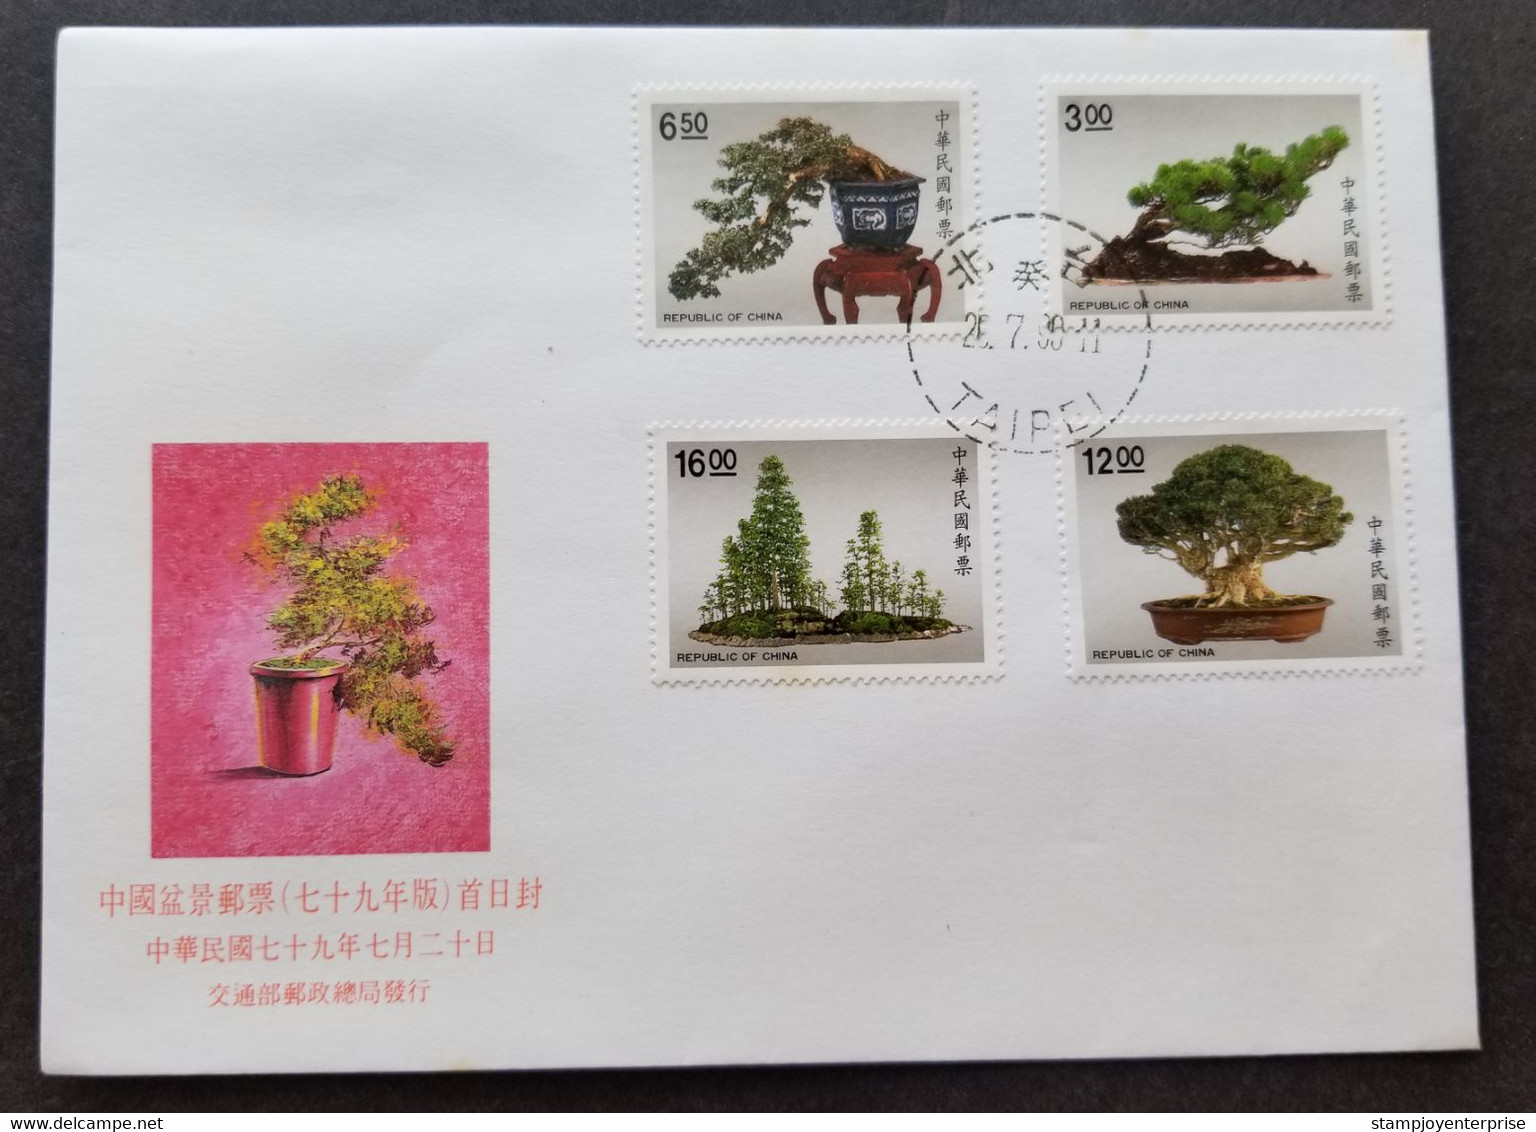 Taiwan Chinese Potted Plants Bonsai 1990 Tree Flower Trees (stamp FDC) *see Scan - Covers & Documents